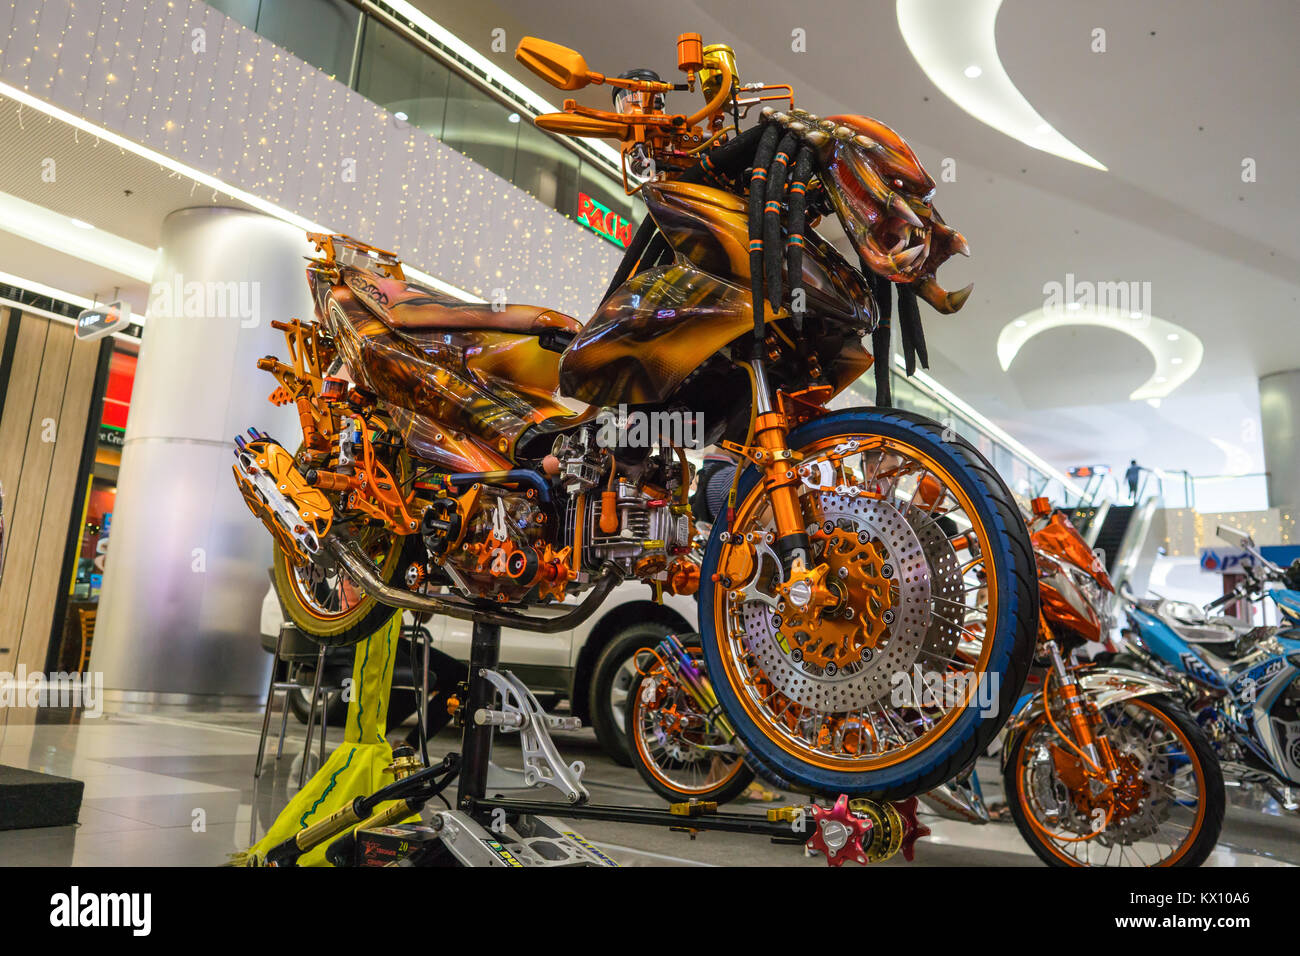 A 150 Raider motorcycle,popular in the Philippines,'blinged up' with the Predator movie theme. Stock Photo